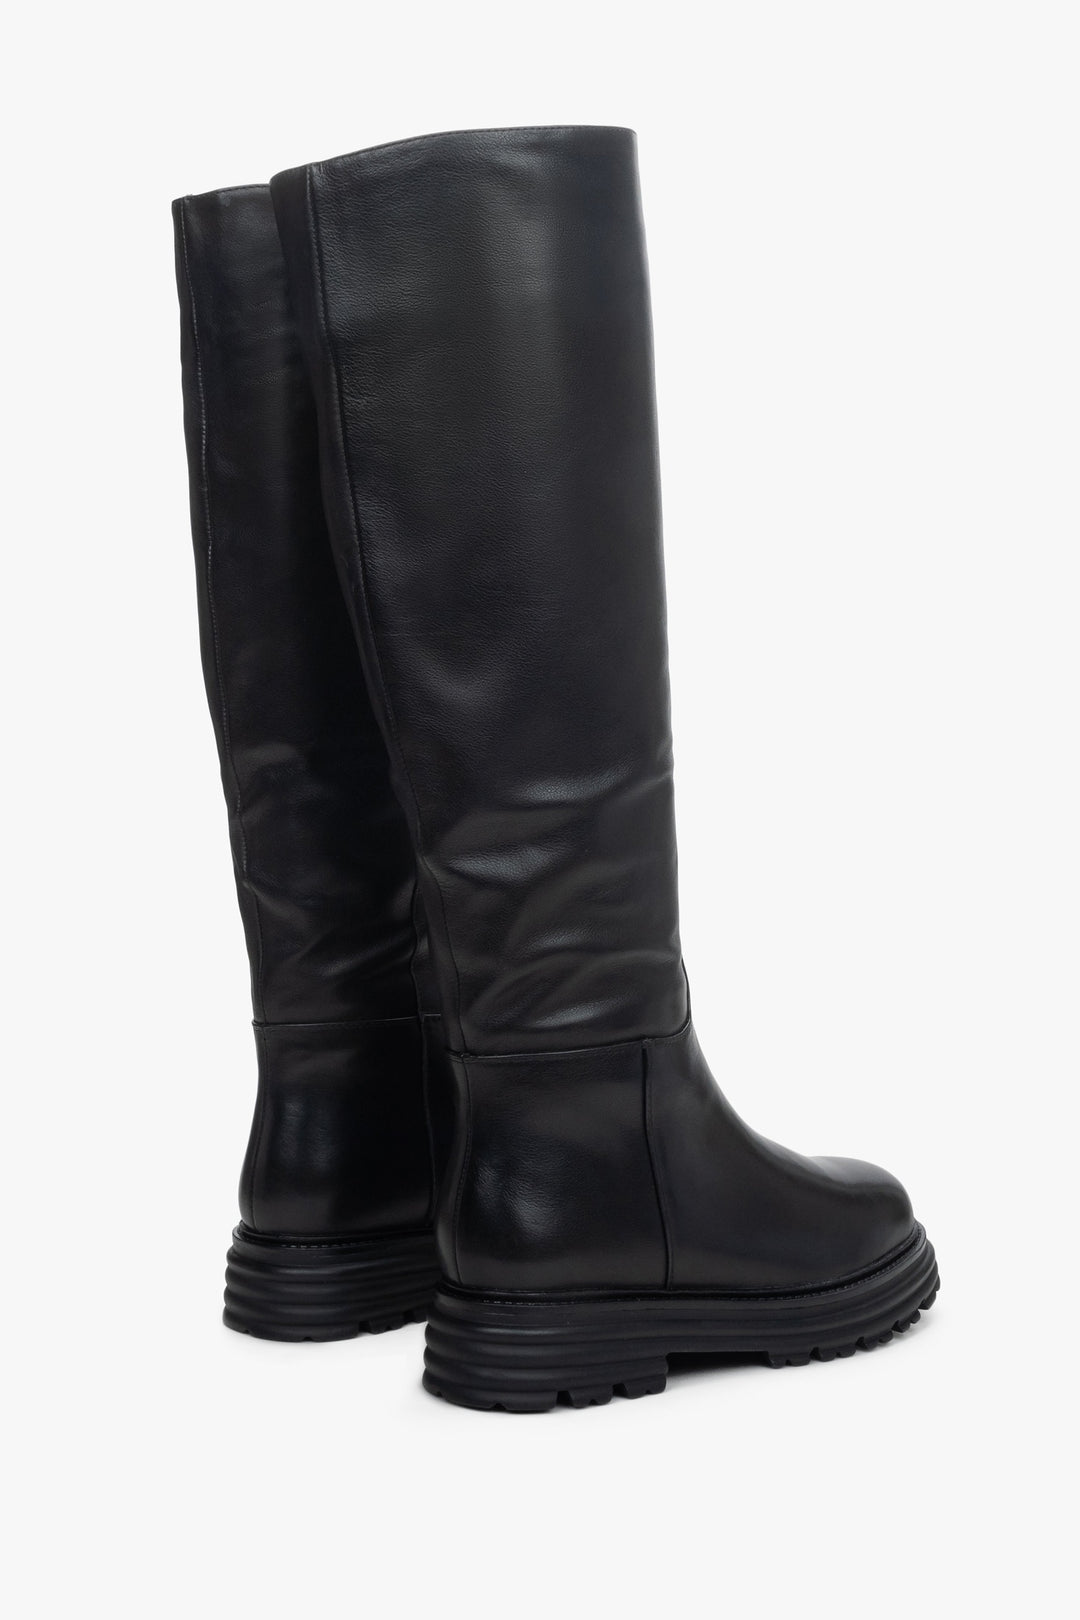 Black leather knee-high boots Estro for winter - close-up on shoe probile and upper.